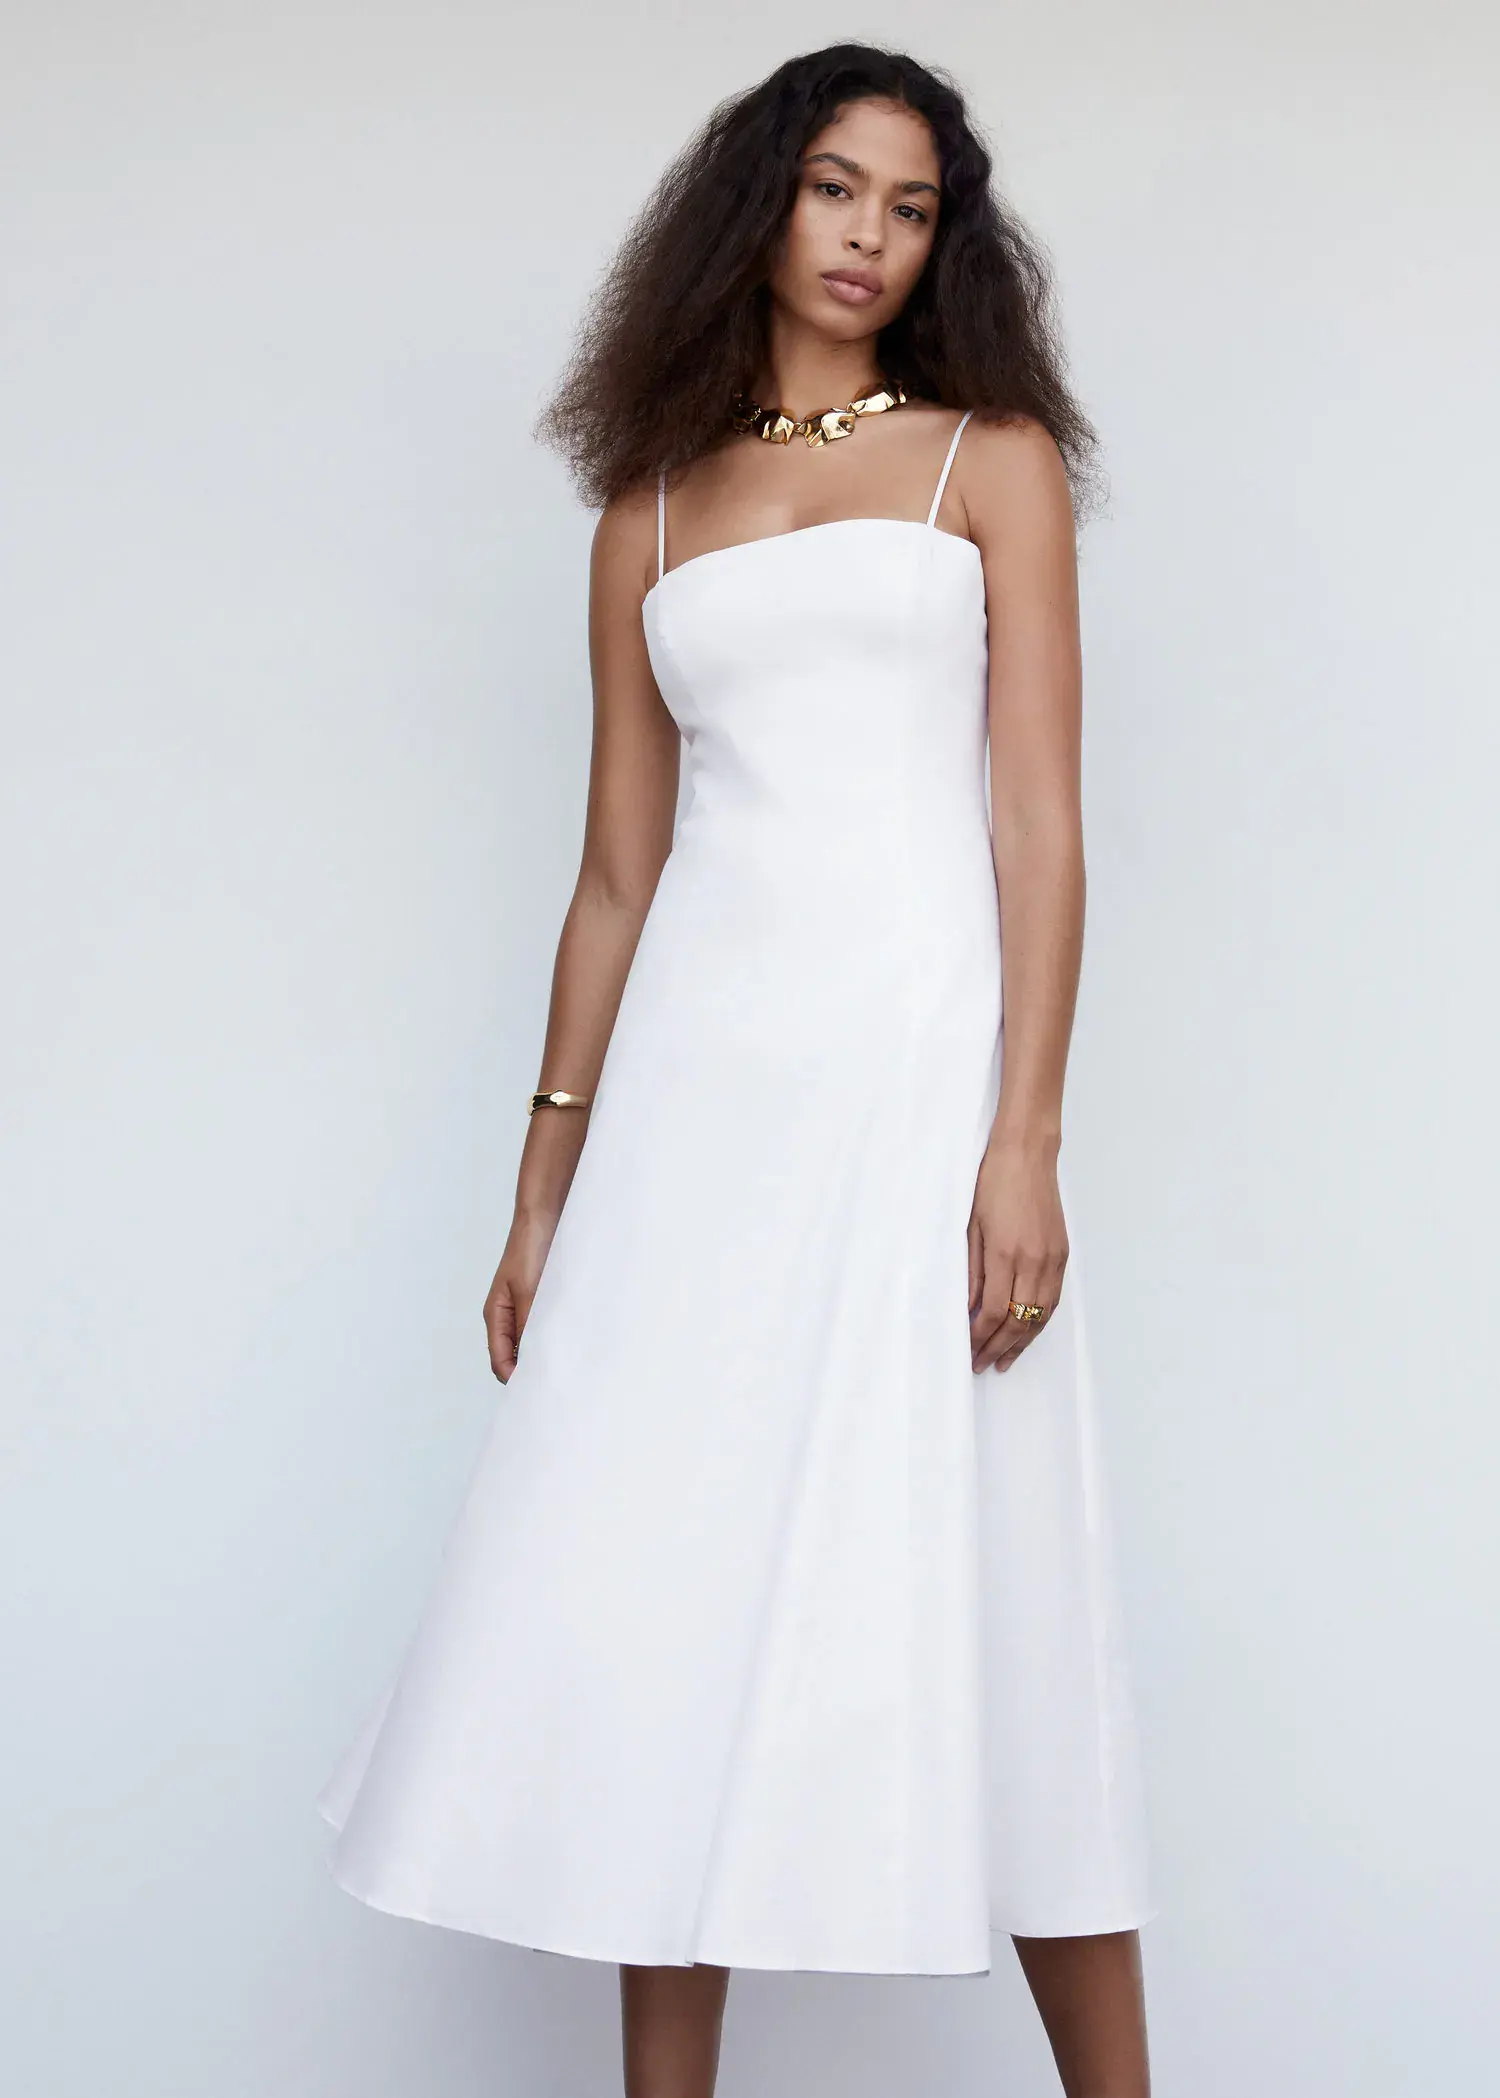 Mango Midi-dress with back detail. a woman in a white dress standing in front of a white wall. 